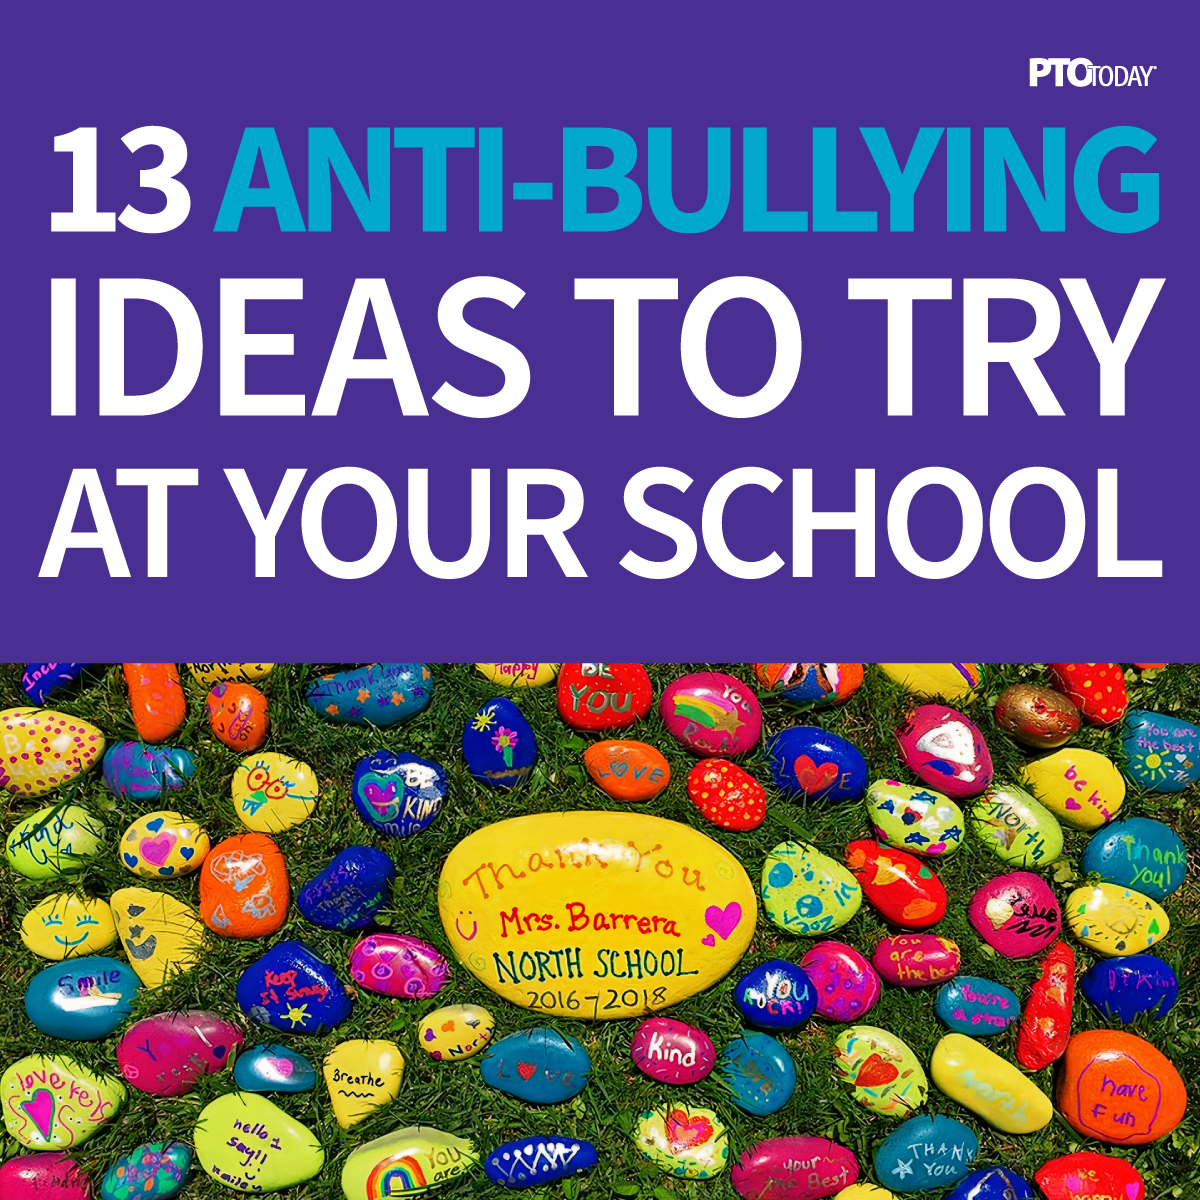 Anti-bullying programs to try at your school